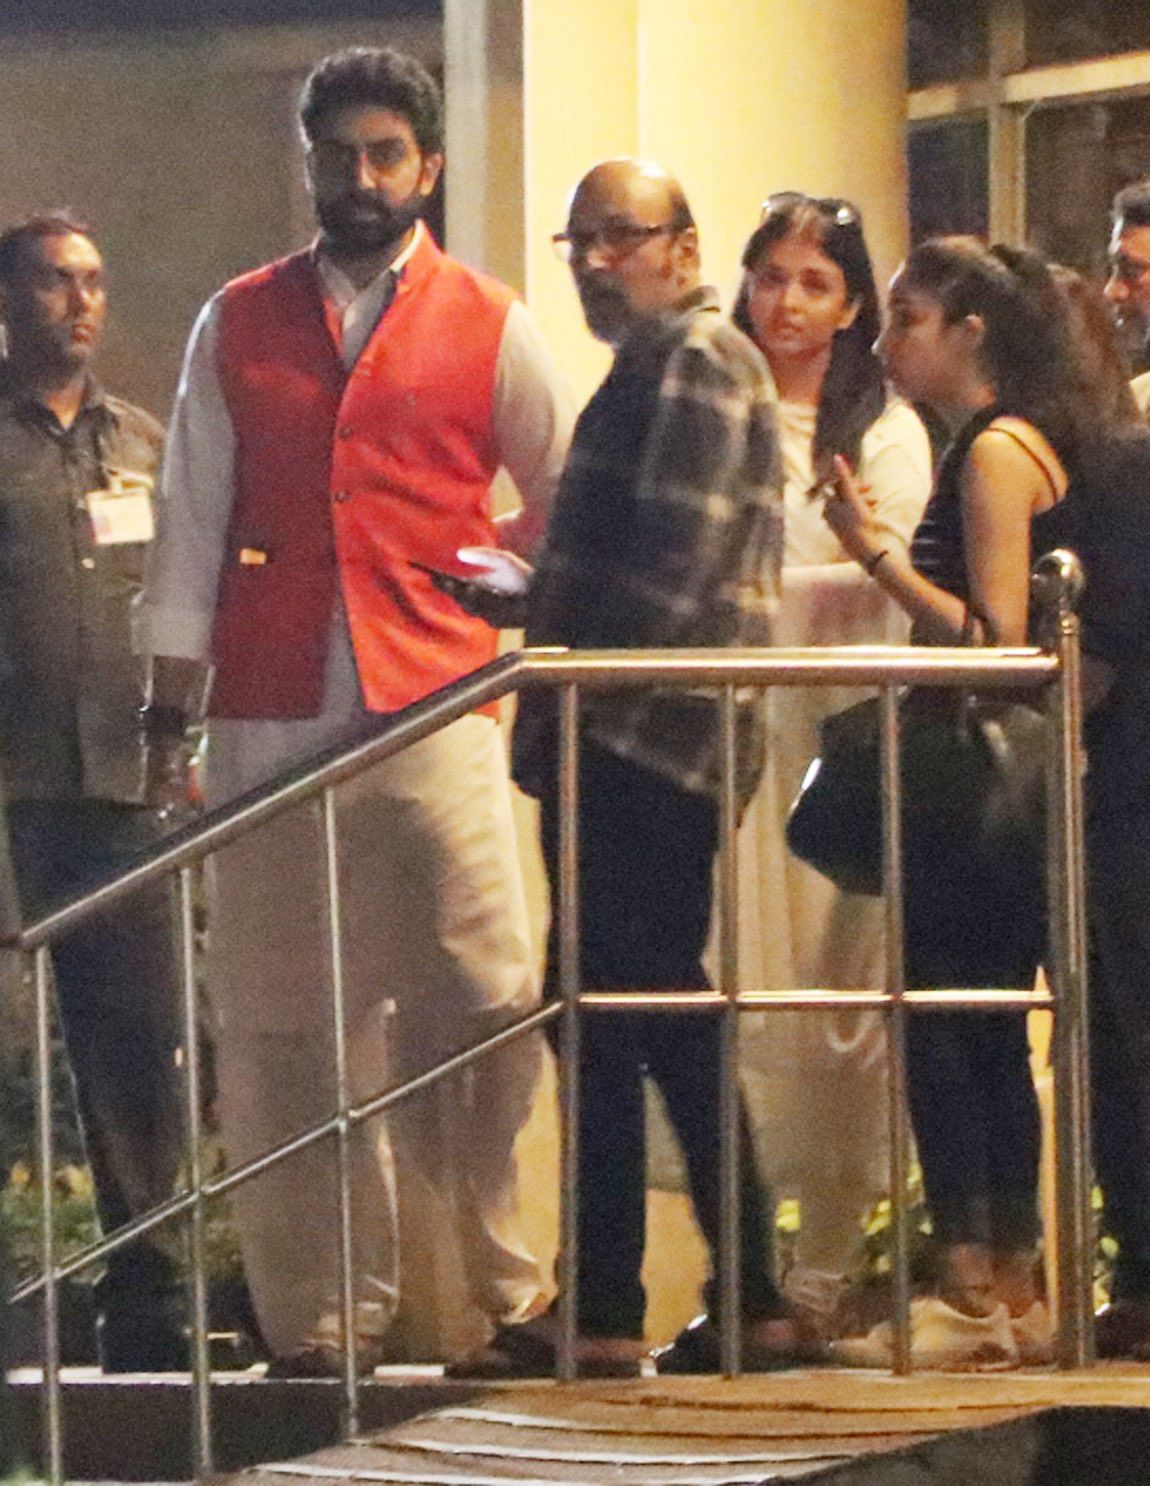  Aishwarya Rai spotted at Lilavati, while Daniel Radcliffe might get married soon.